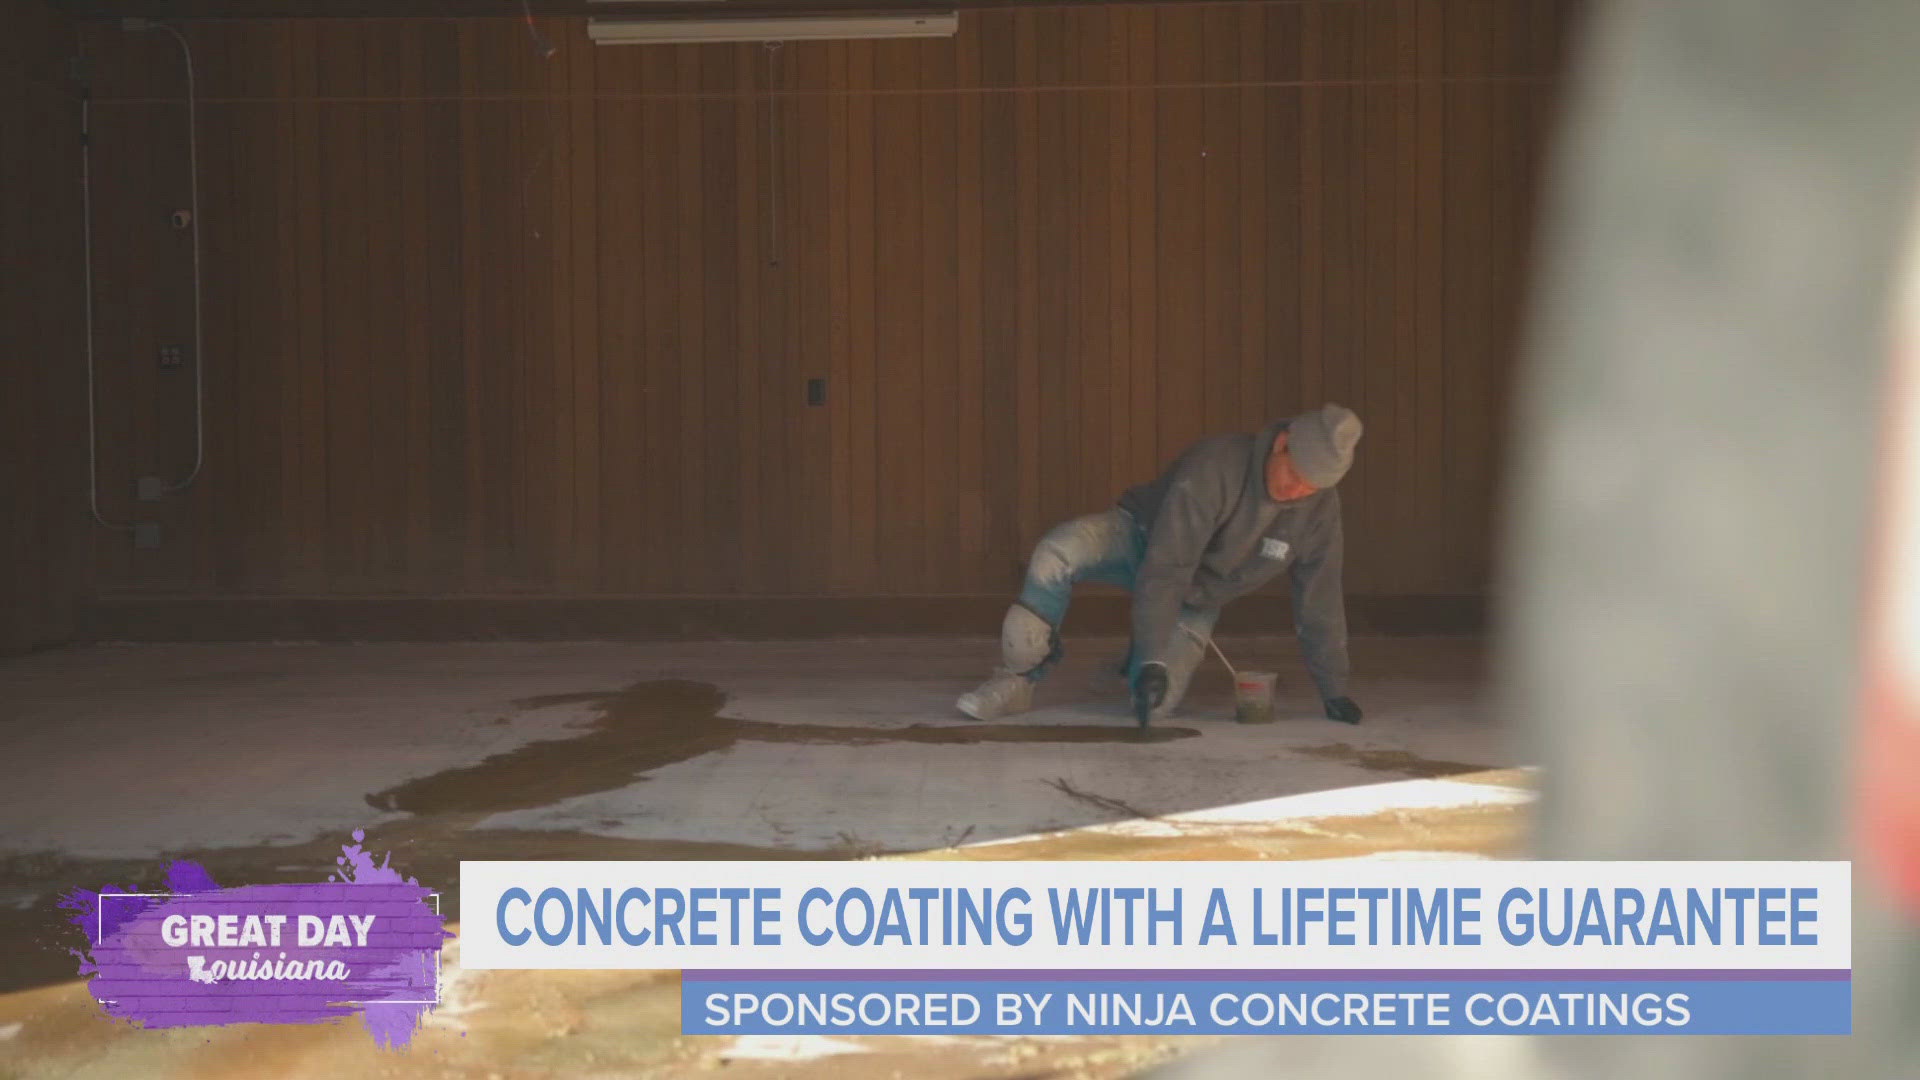 Learn more about the different process that Ninja Concrete Coatings use and their lifetime guarantee.